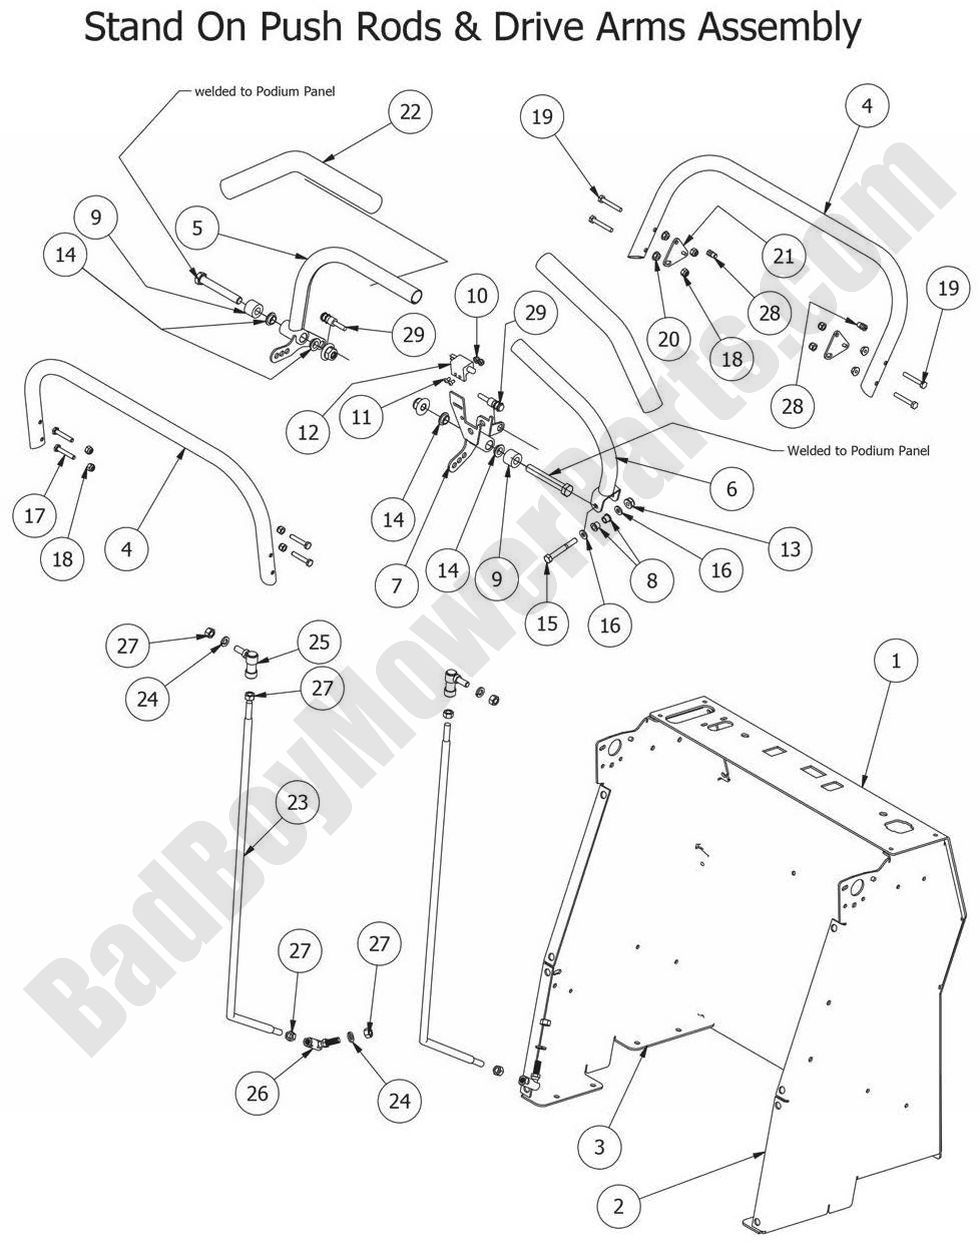 2014 Stand-On Push Rods and Drive Arm Assembly